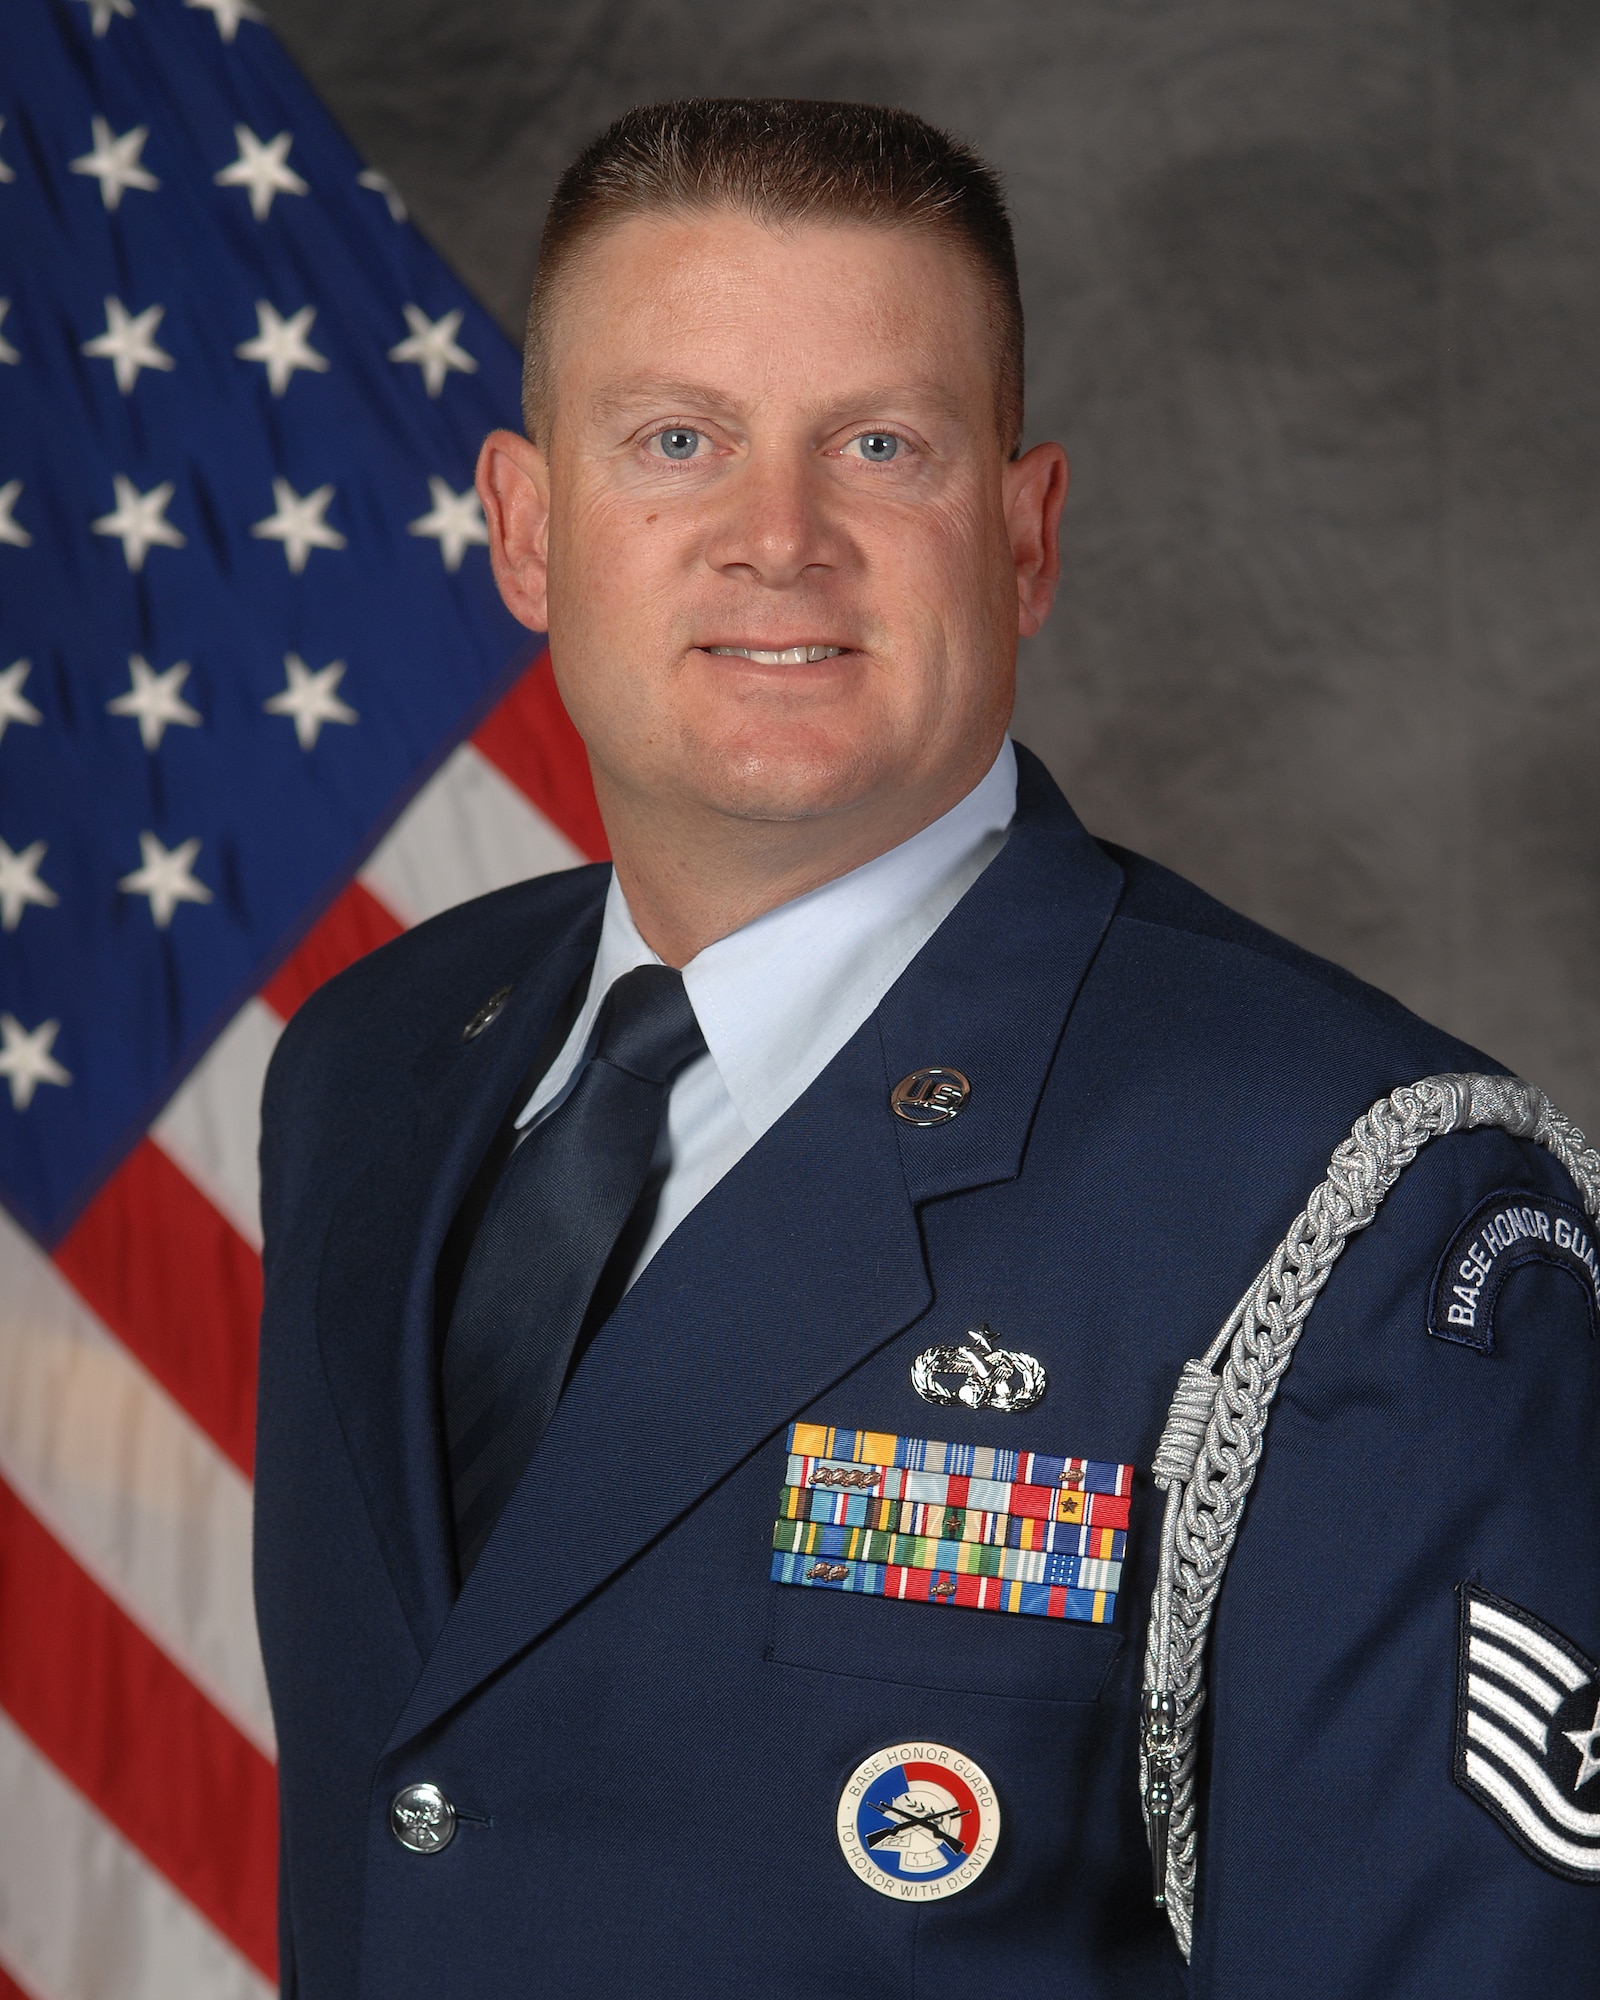 OFFUTT AIR FORCE BASE, Neb. -- Tech. Sgt. Troy A. Bizzack, assigned to Holloman AFB, N.M., is one of 29 Airmen who will attend the 2010 Air Combat Command Outstanding Airmen of the Year Awards Banquet in Omaha, Neb., April 21. Sergeant Bizzack is nominated for the Outstanding Honor Guard Program Manager of the Year Award. U.S. Air Force courtesy photo

